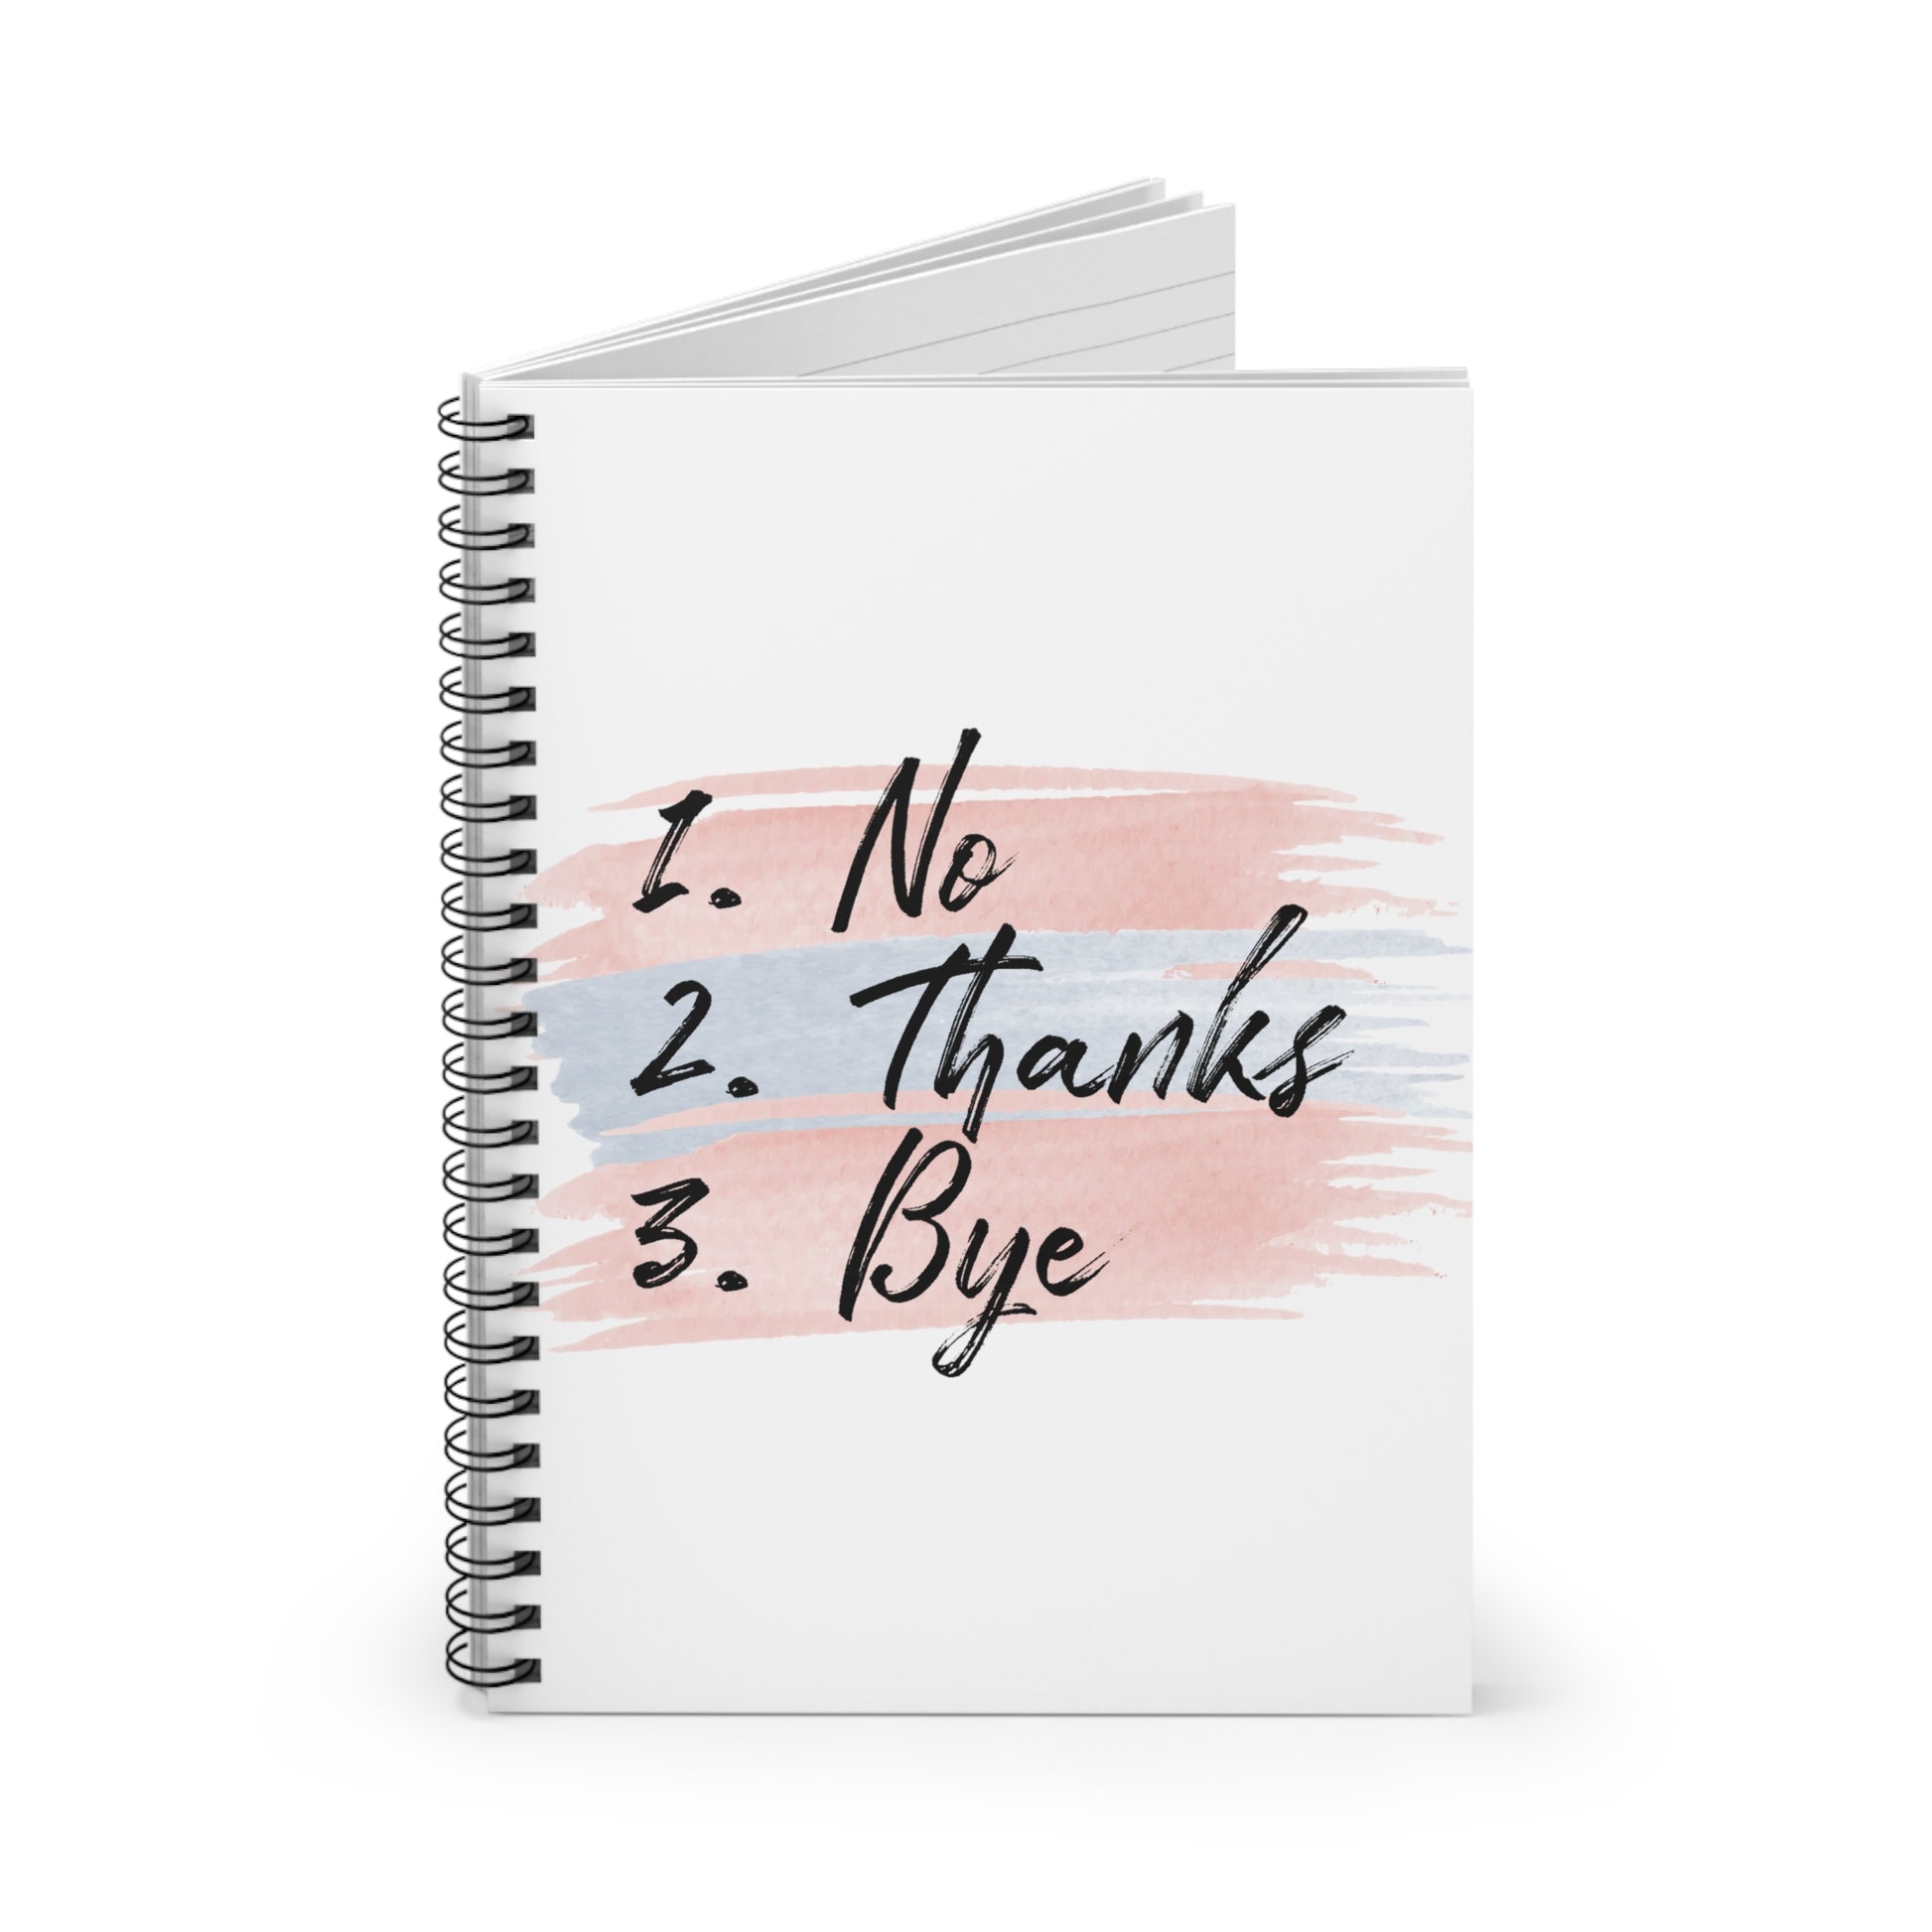 No - Thanks - Bye: Spiral Notebook - Log Books - Journals - Diaries - and More Custom Printed by TheGlassyLass